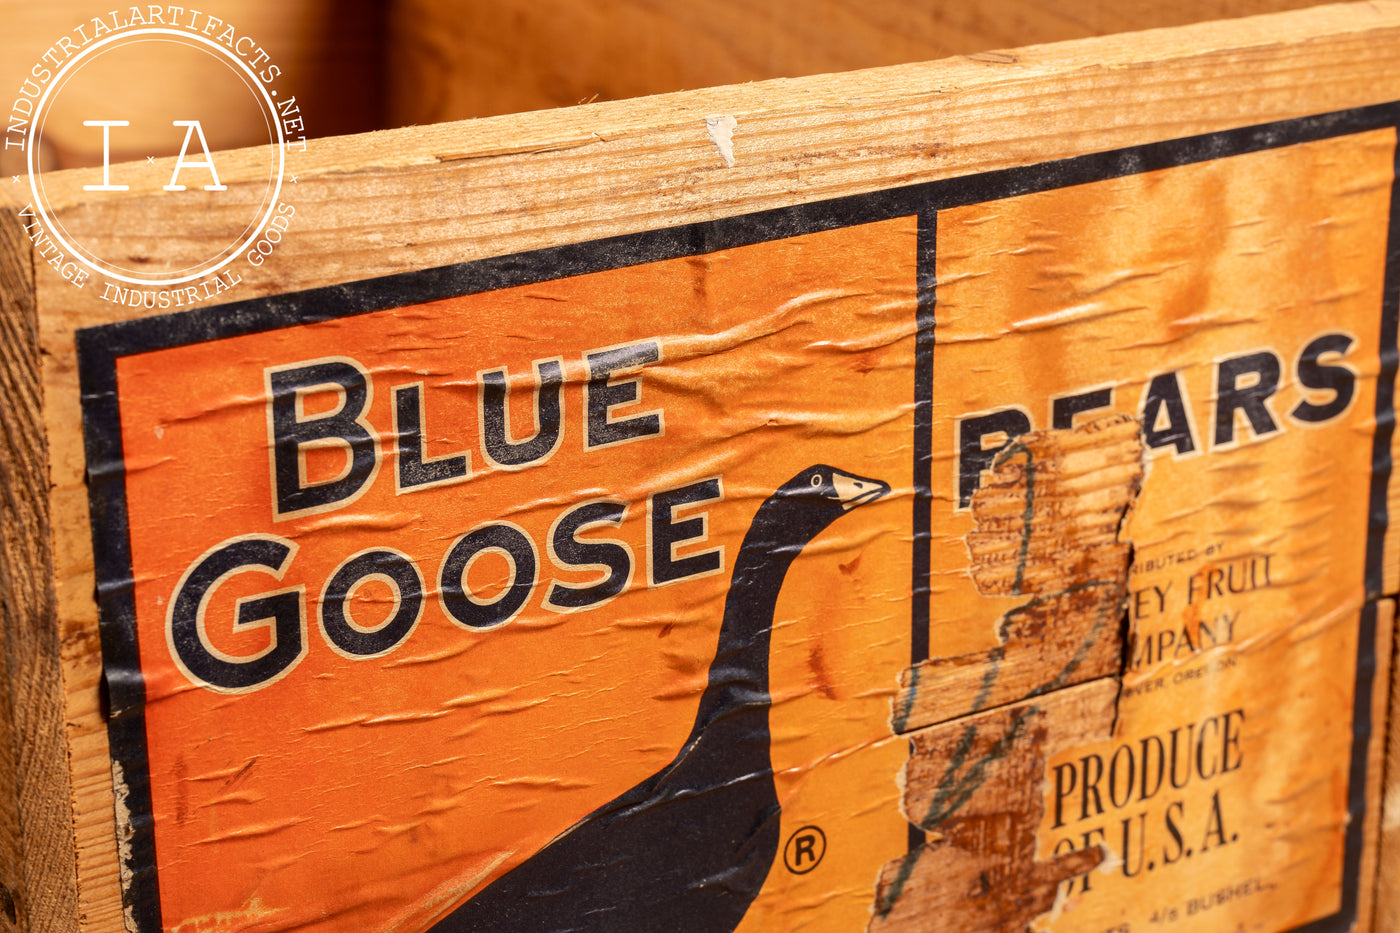 Vintage Blue Goose Pears Shipping Crate